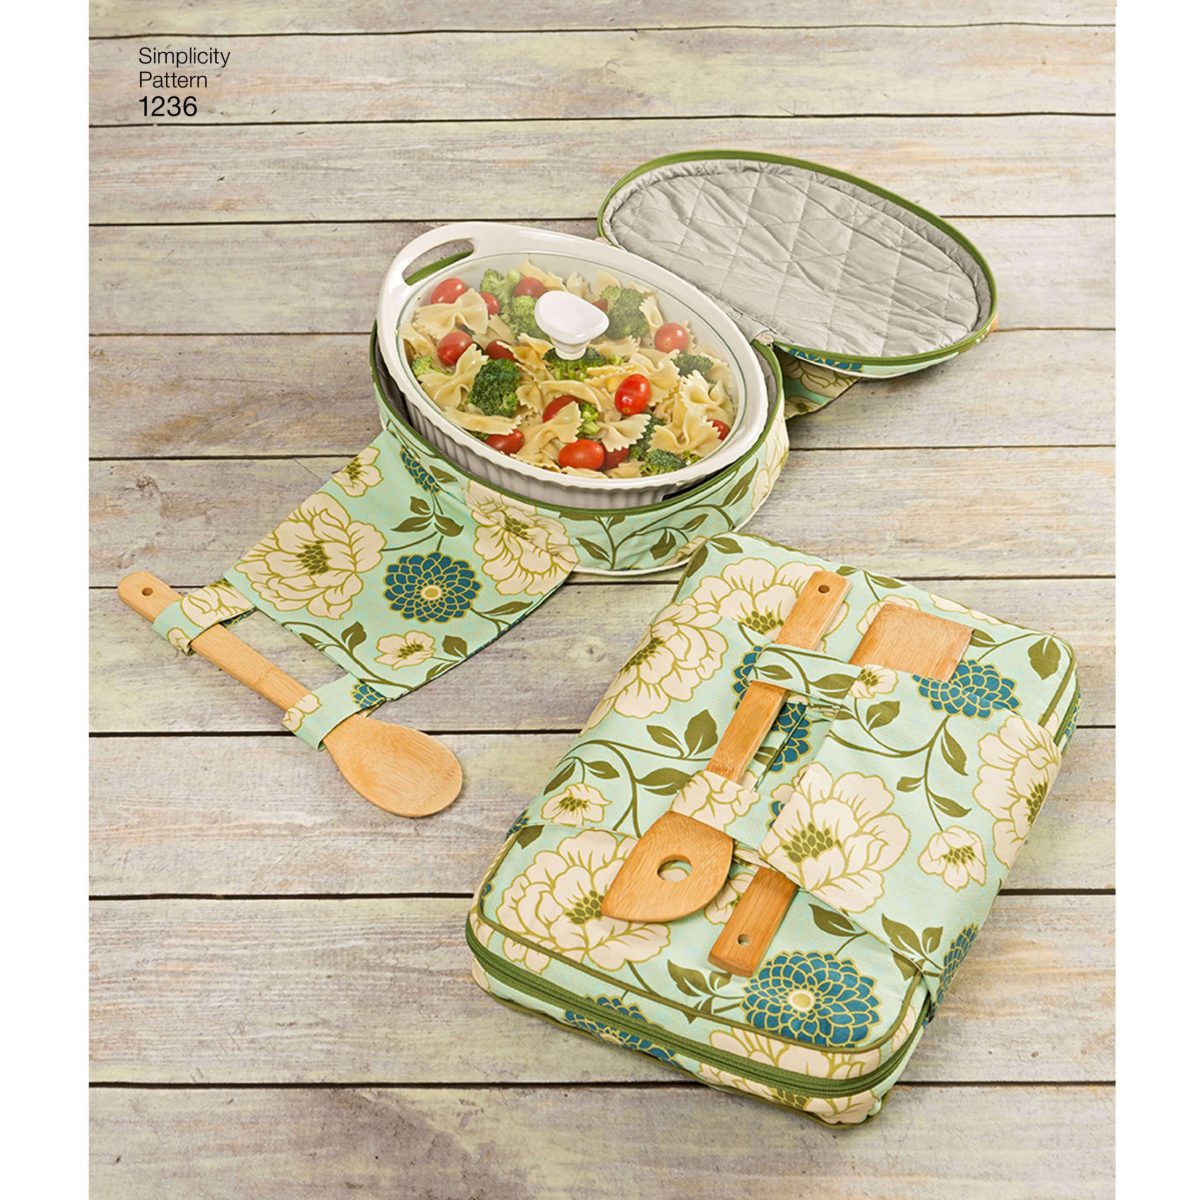 Simplicity Sewing Pattern 1236 Casserole Carriers, Gifting Baskets and Bowl Covers